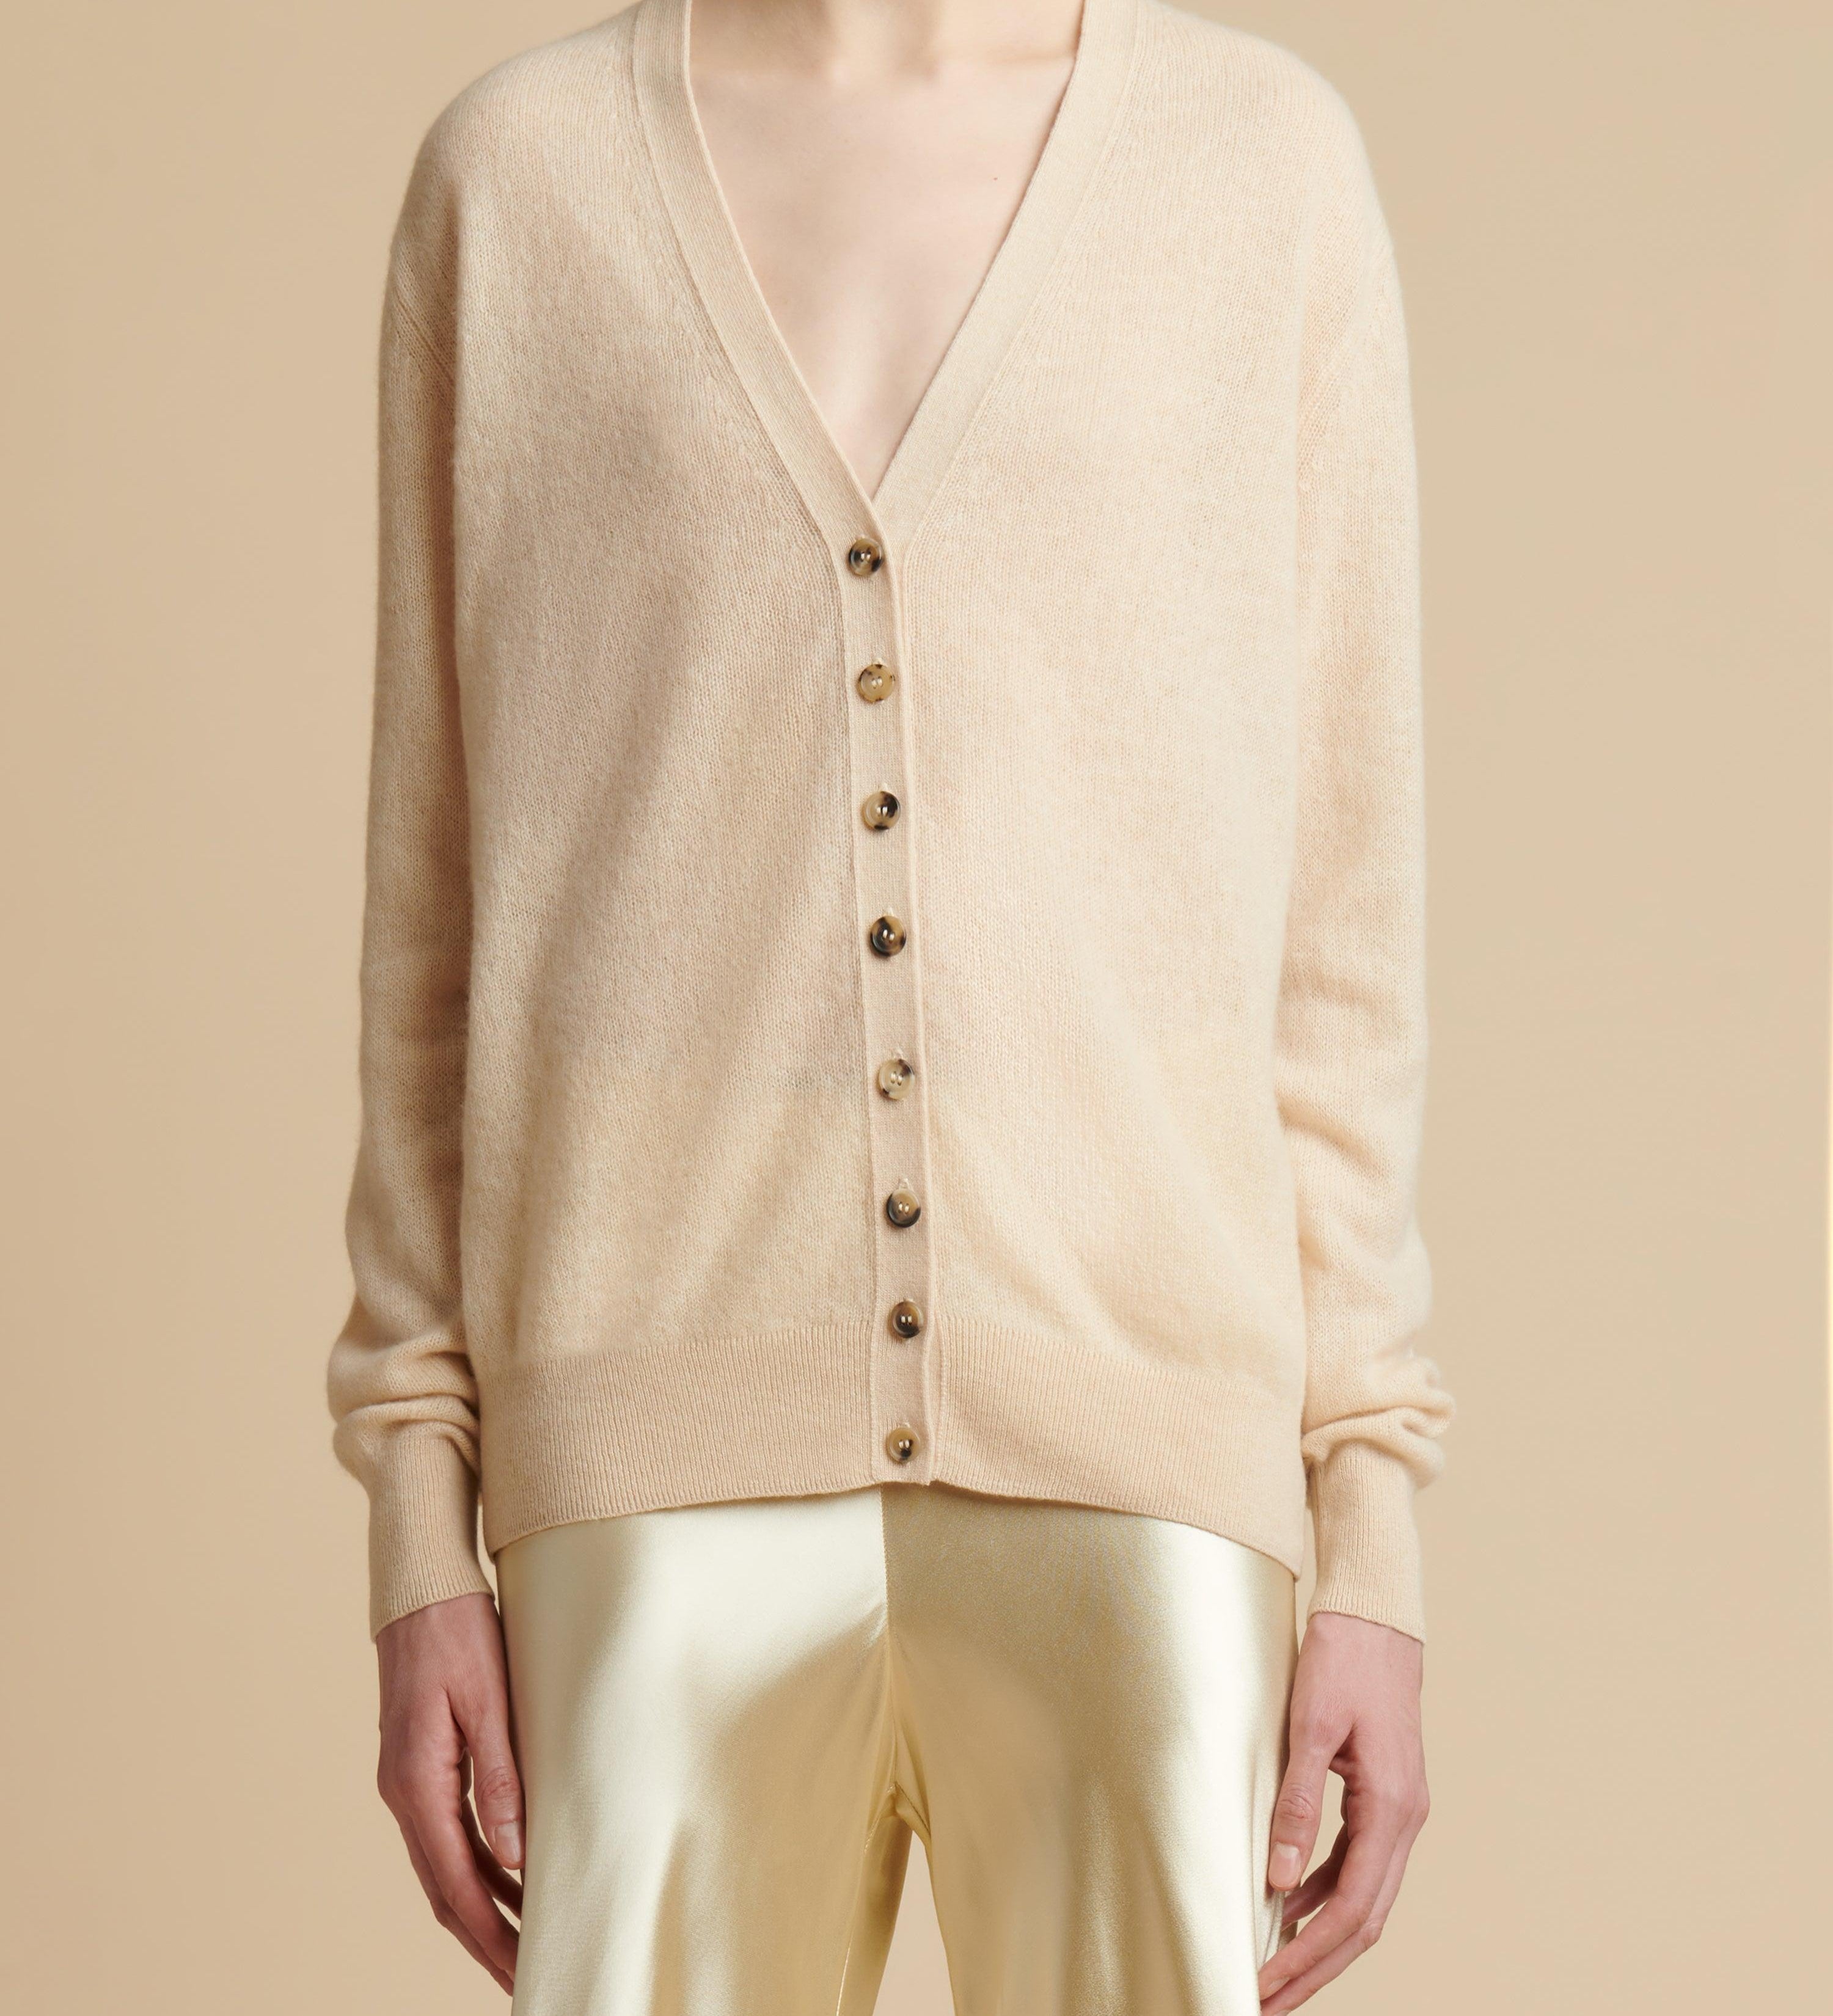 The Amelia Cardigan in Custard - The Iconic Issue